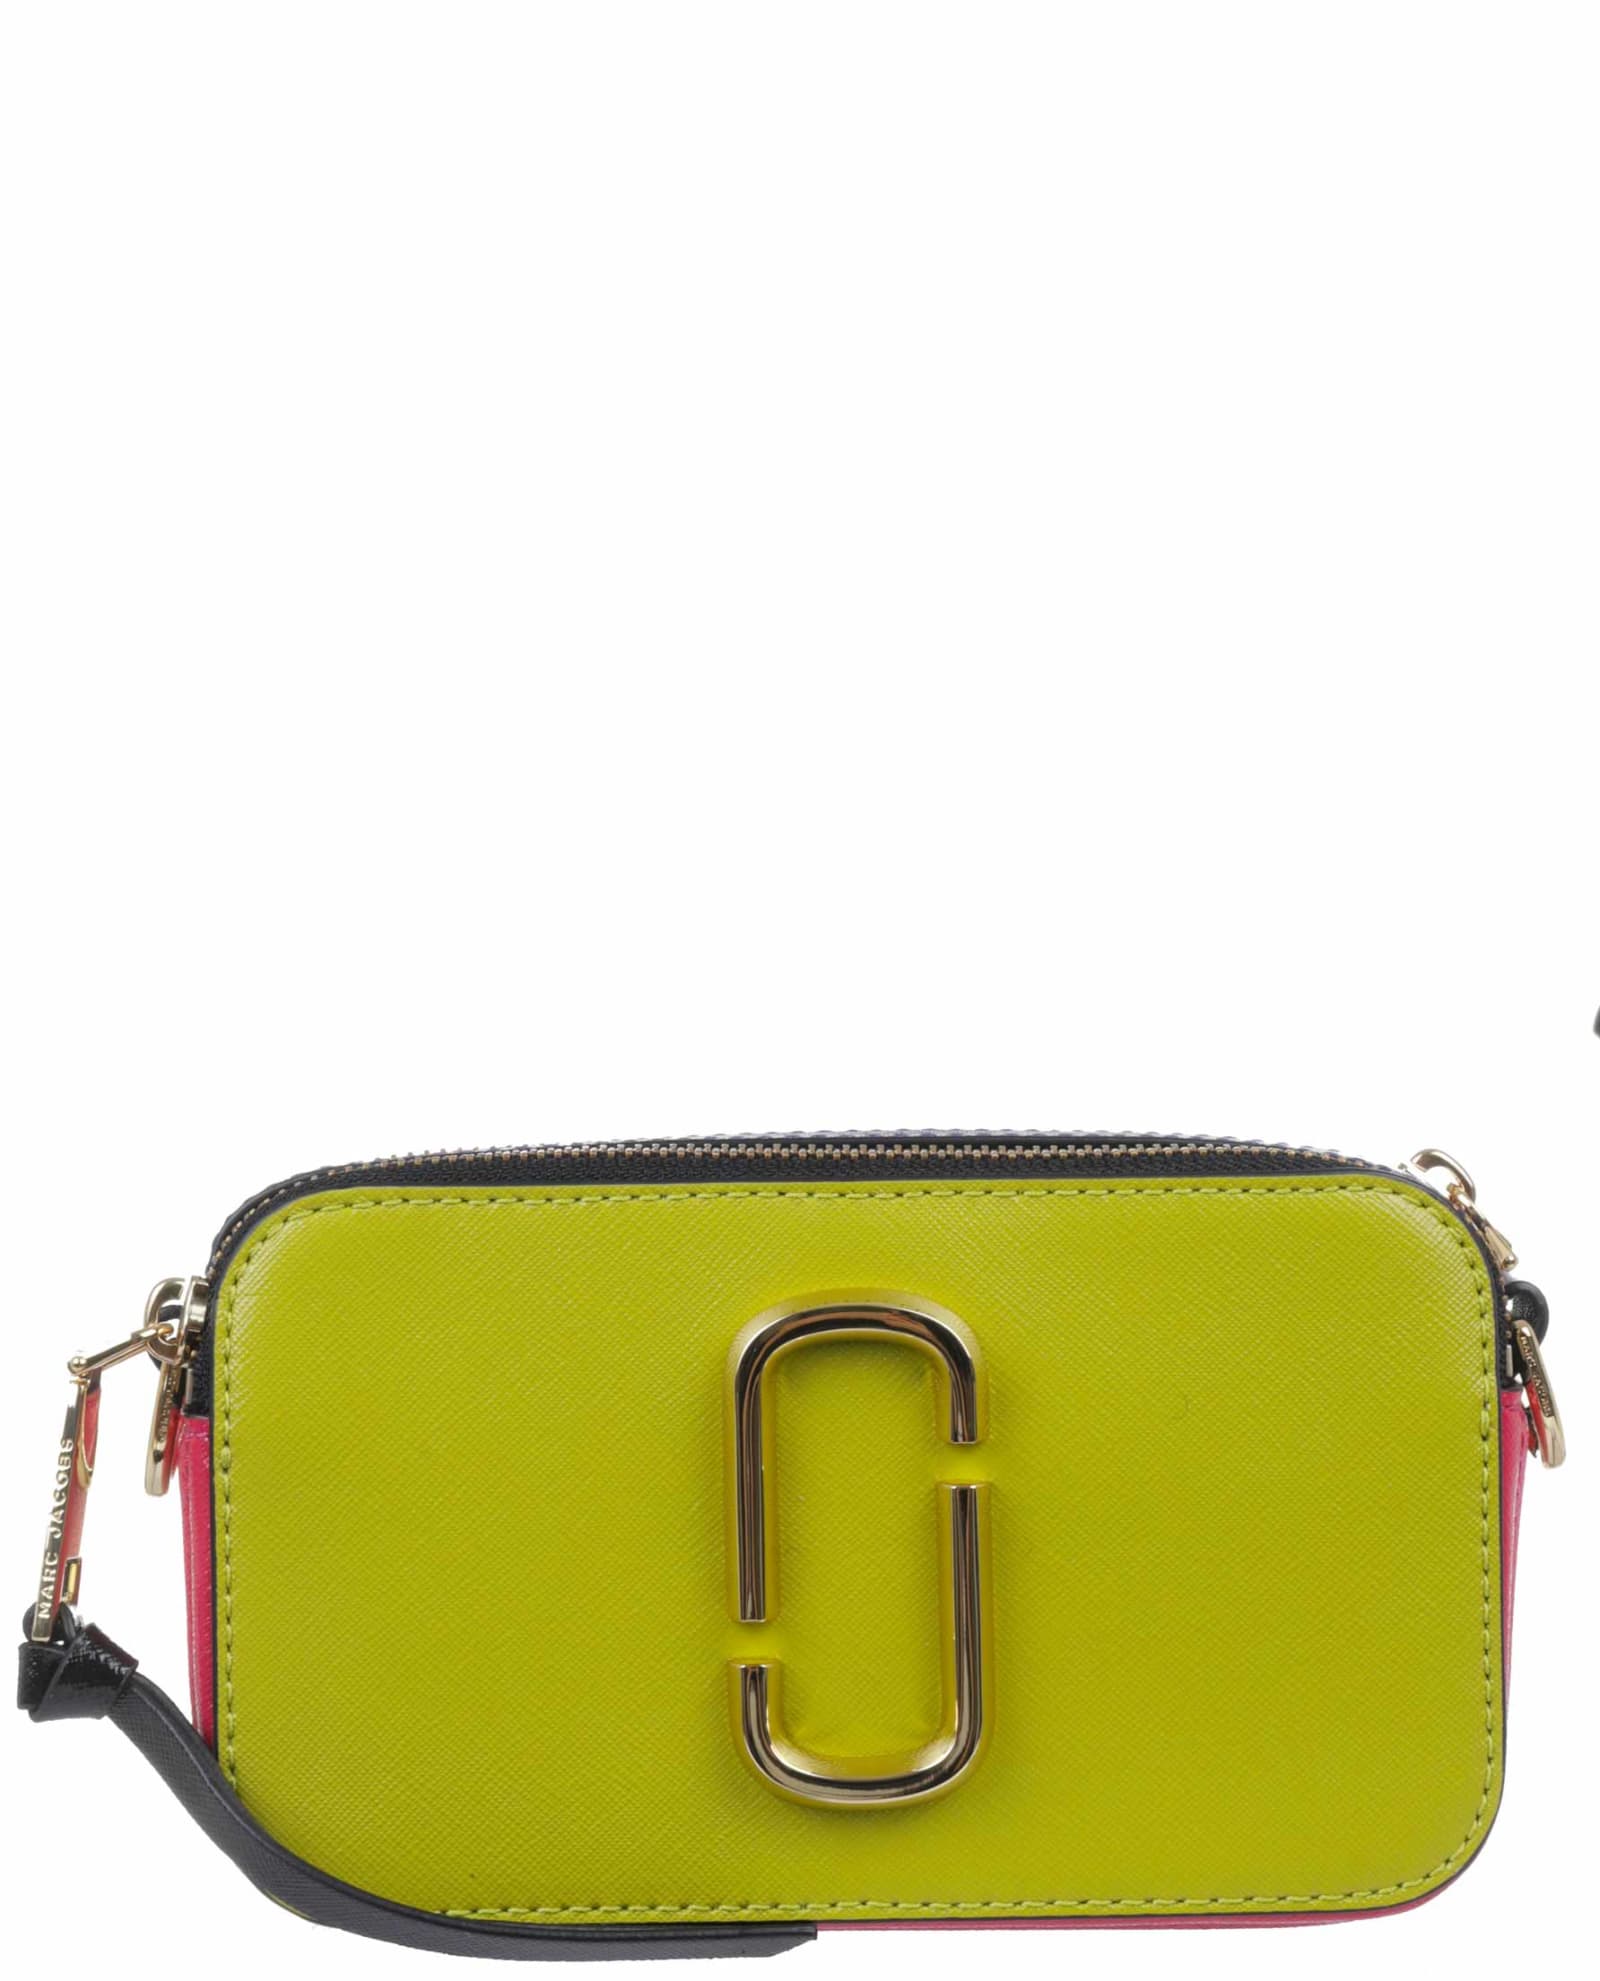 The Marc Jacobs Chartreuse Snapshot